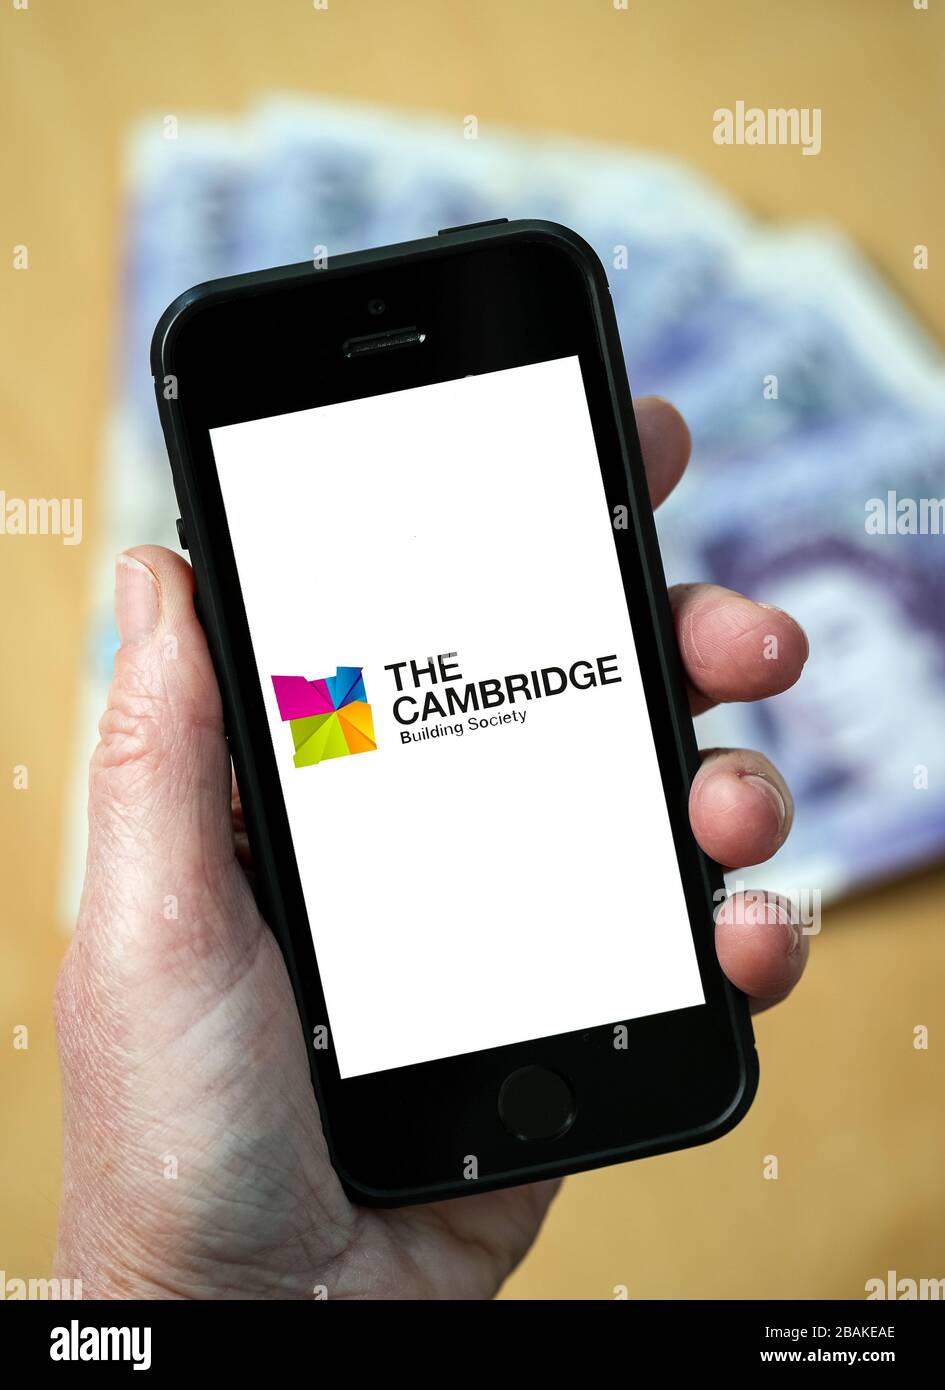 A woman holding a mobile phone showing The Cambridge Building Society (editorial use only) Stock Photo